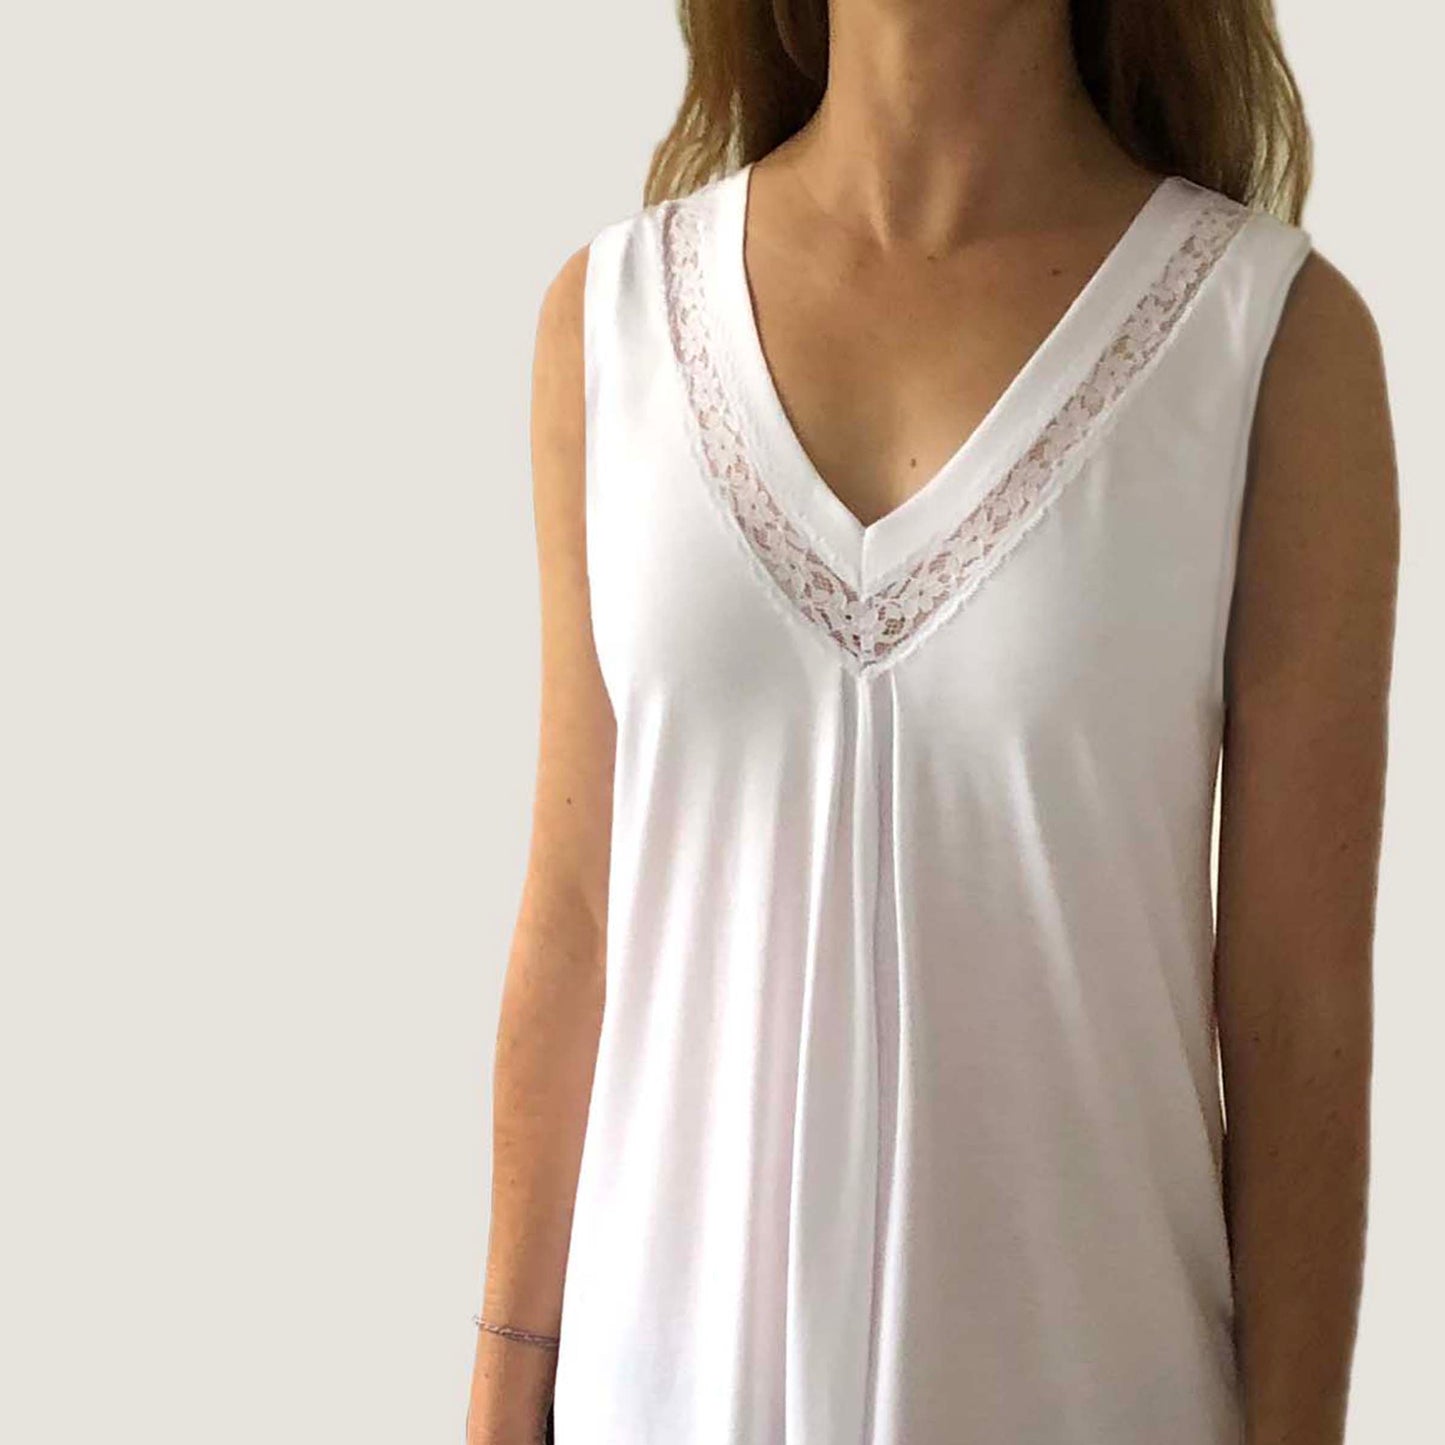 Miami Summer Nightgown in Black or White